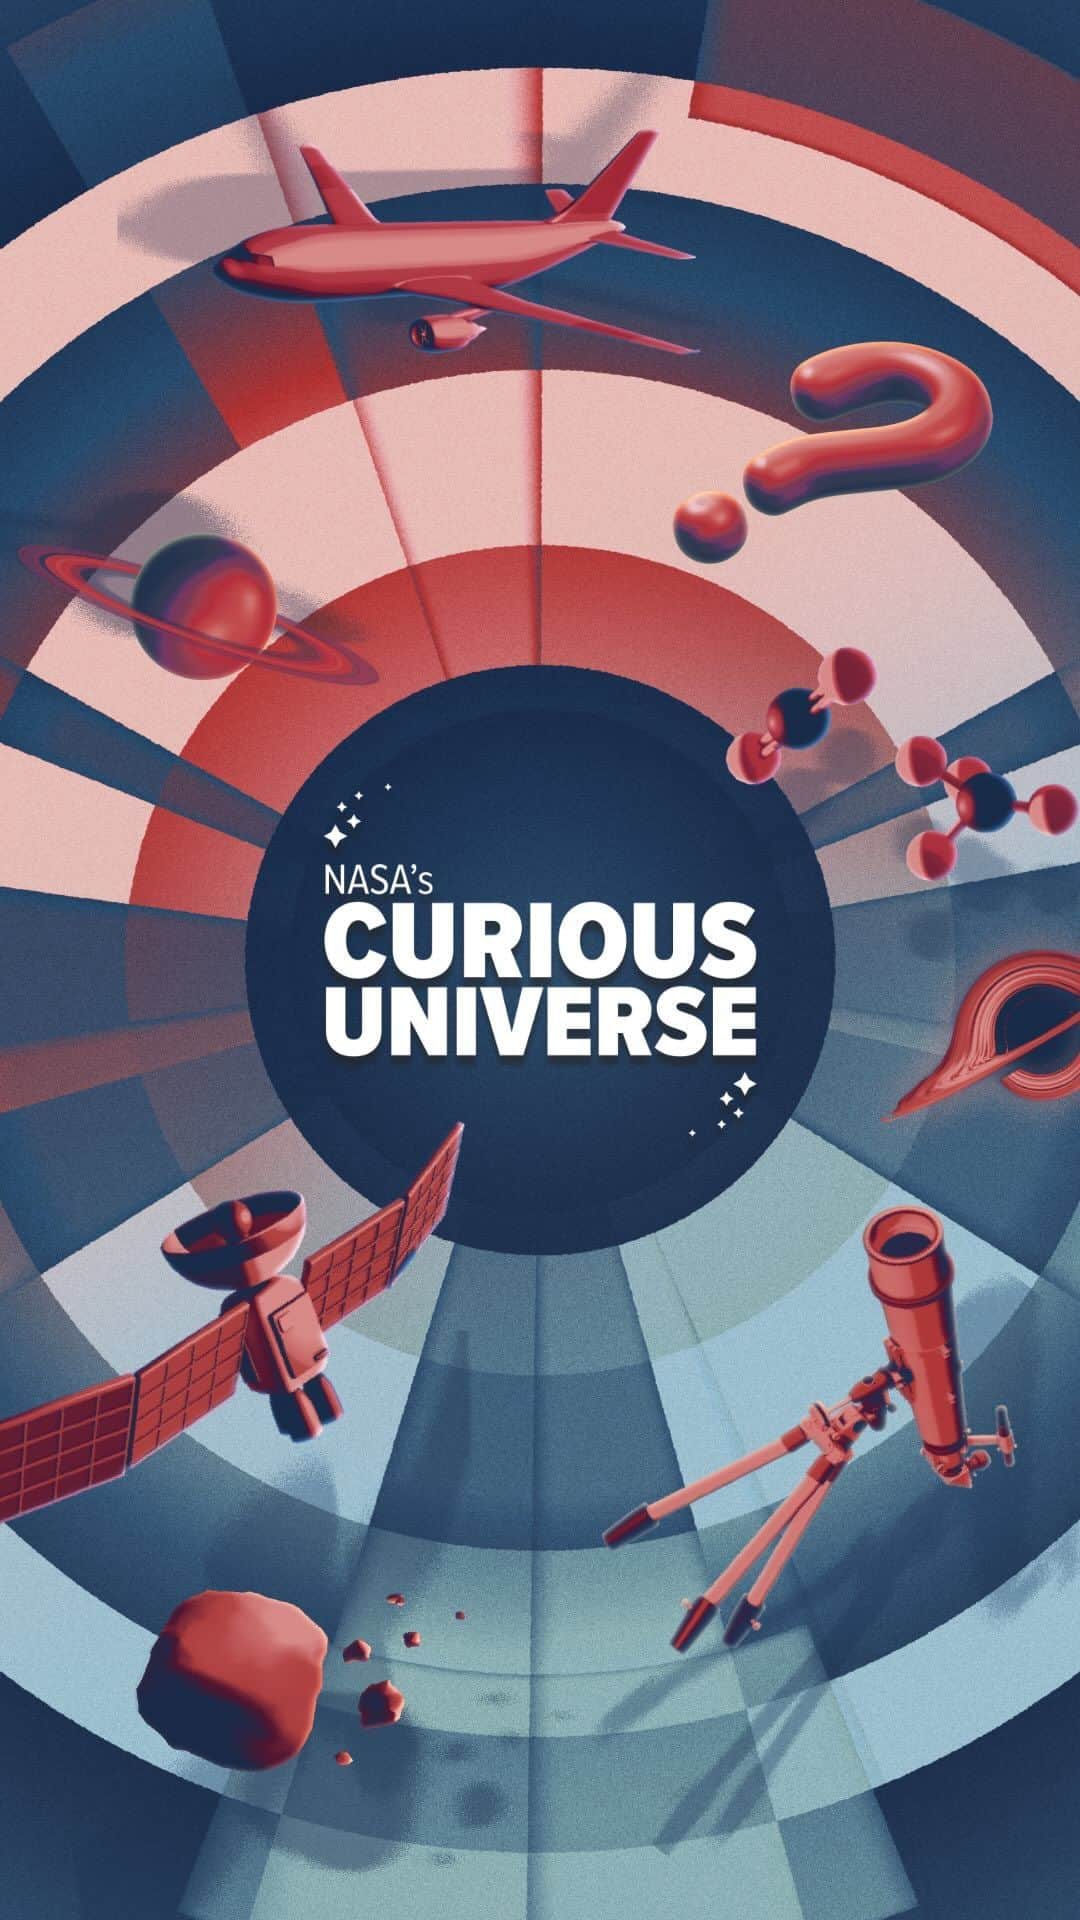 NASAのインスタグラム：「It’s time to get curious! 💫   NASA’s Curious Universe podcast is back with a new season of wild and wonderful adventures. Tune in every Tuesday starting Nov. 7 for stories from right here on our home planet to the farthest parts of the known universe: nasa.gov/podcasts  Video description: 0:00 Man wearing headphones throws a stuffed rocket at the screen, camera follows the stuffed rocket. 0:02 Camera goes back to the man wearing headphones, speaking directly to camera while zooming in for emphasis. 0:14 NASA’s Curious Universe logo appears full screen. The logo is an illustration of a navy blue circle with a logo in the center that reads “NASA’s Curious Universe” in white letters with stars in the upper left and bottom right. Surrounding the circle, there are panels of shades of alternative reds and blues with red icons floating. 0:16 Back to man with headphones, speaking to camera. 0:19 Animation of Big Bang with galaxies appearing after. 0:20 Animation of Earth with space background. 0:22 Back to man with headphones, speaking to camera. 0:31 Blurred screen with nasa.gov/podcasts text on screen. 0:33 Back to man with headphones, speaking to camera. 0:35 NASA’s Curious Universe logo appears full screen and flips to NASA podcast logo.  #curious #podcast #CuriousUniverse #space #universe  #sun #spacenerd」